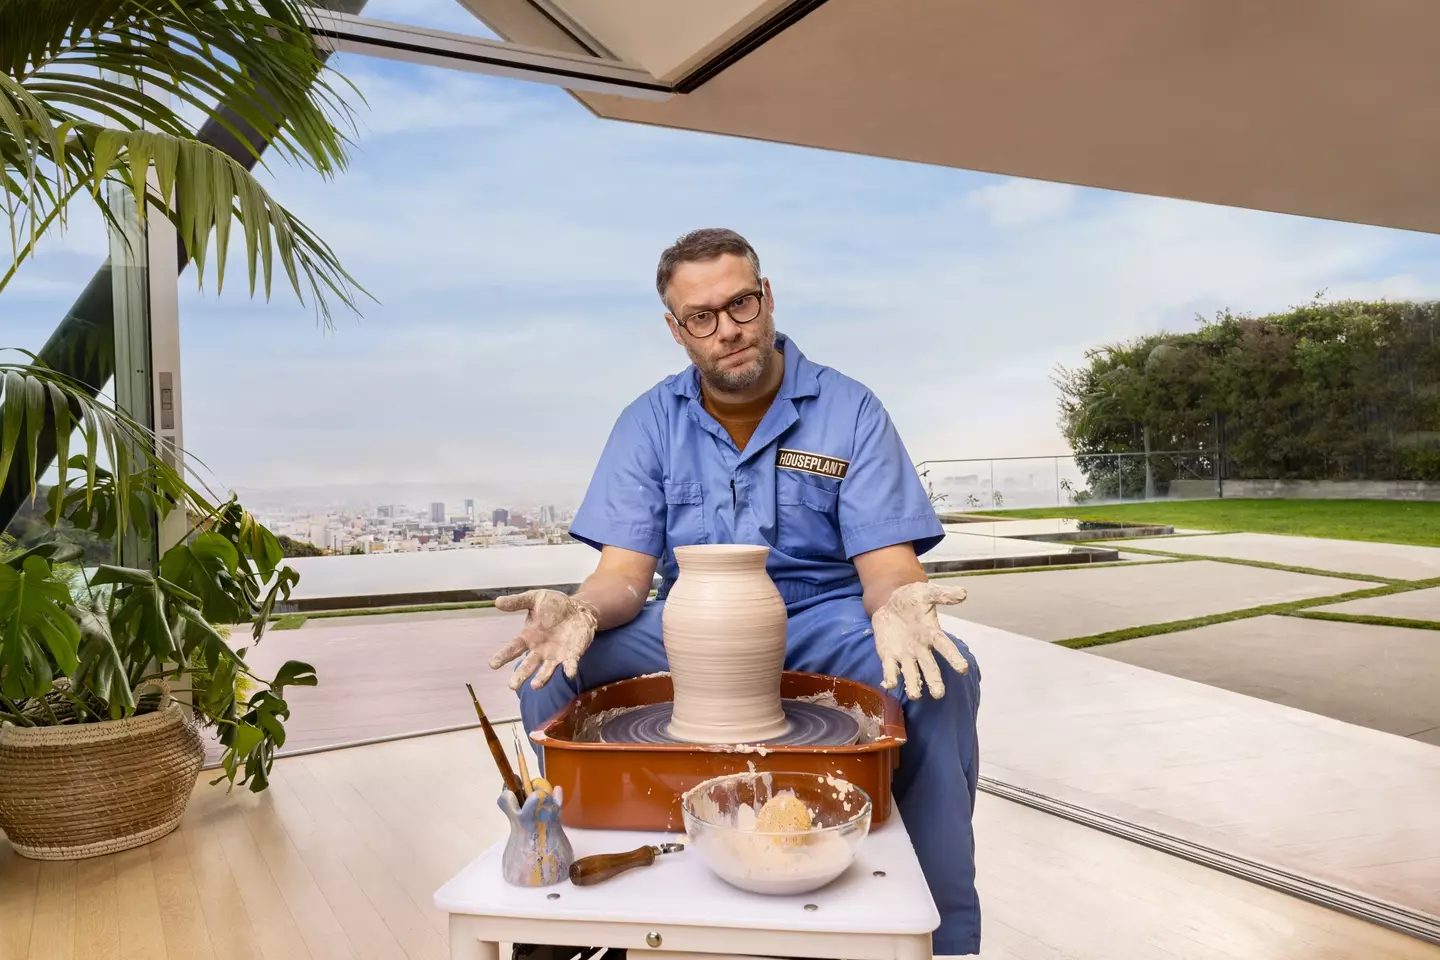 Rogen owns his own company called 'Houseplant' that sells pottery and other homeware.